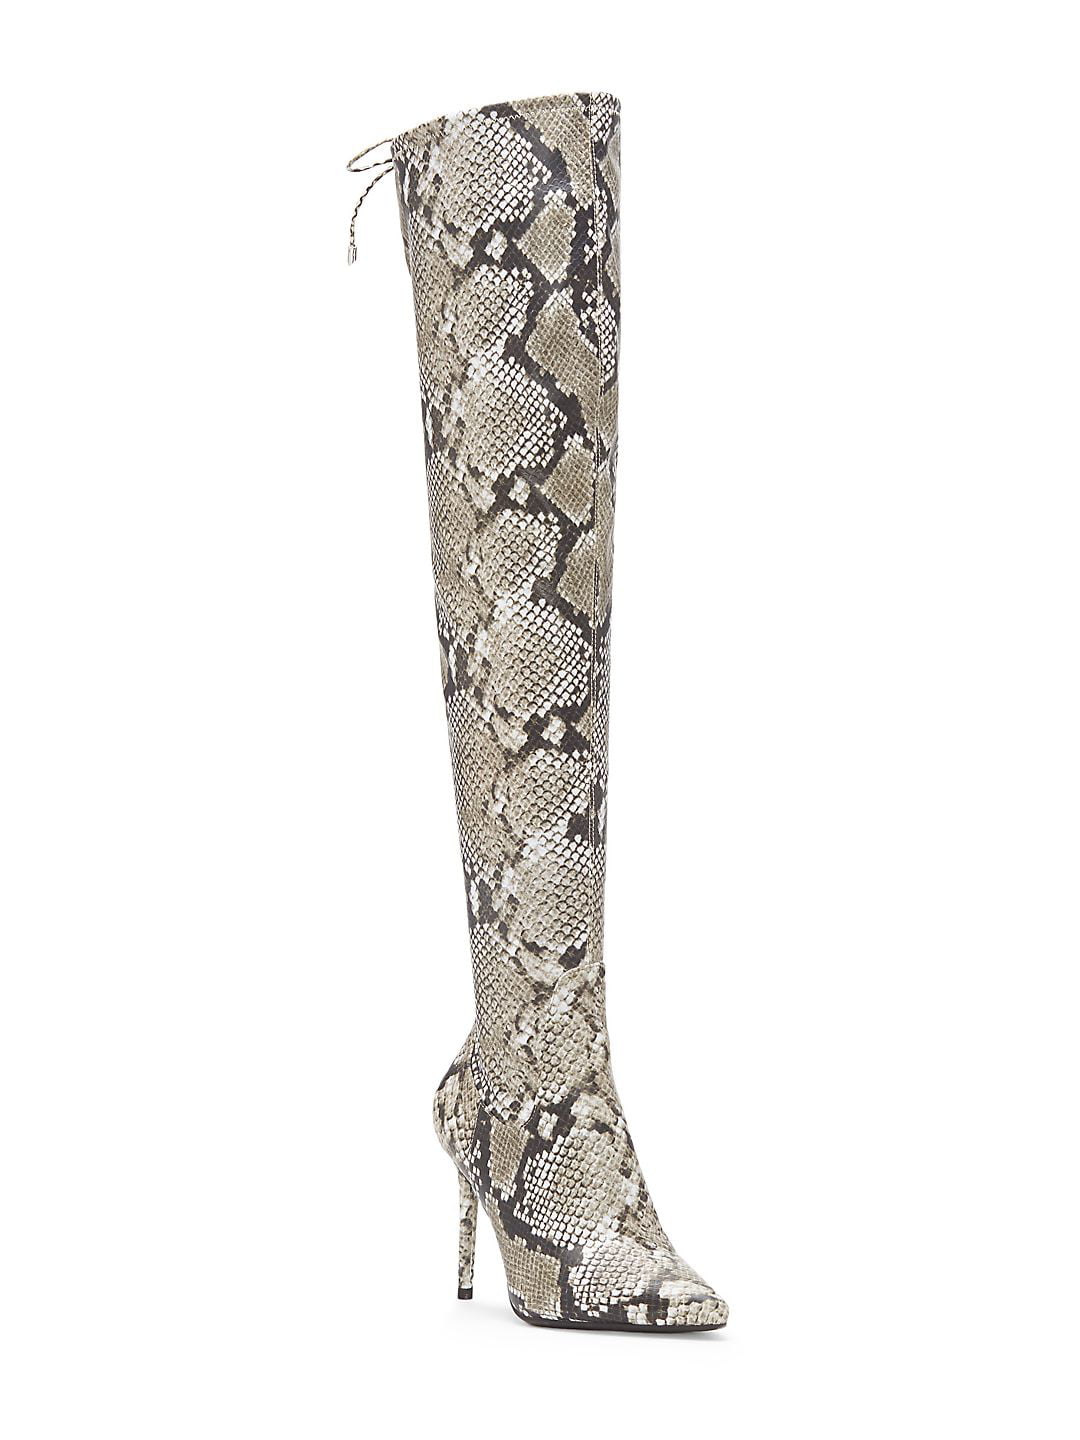 jessica simpson snake boots